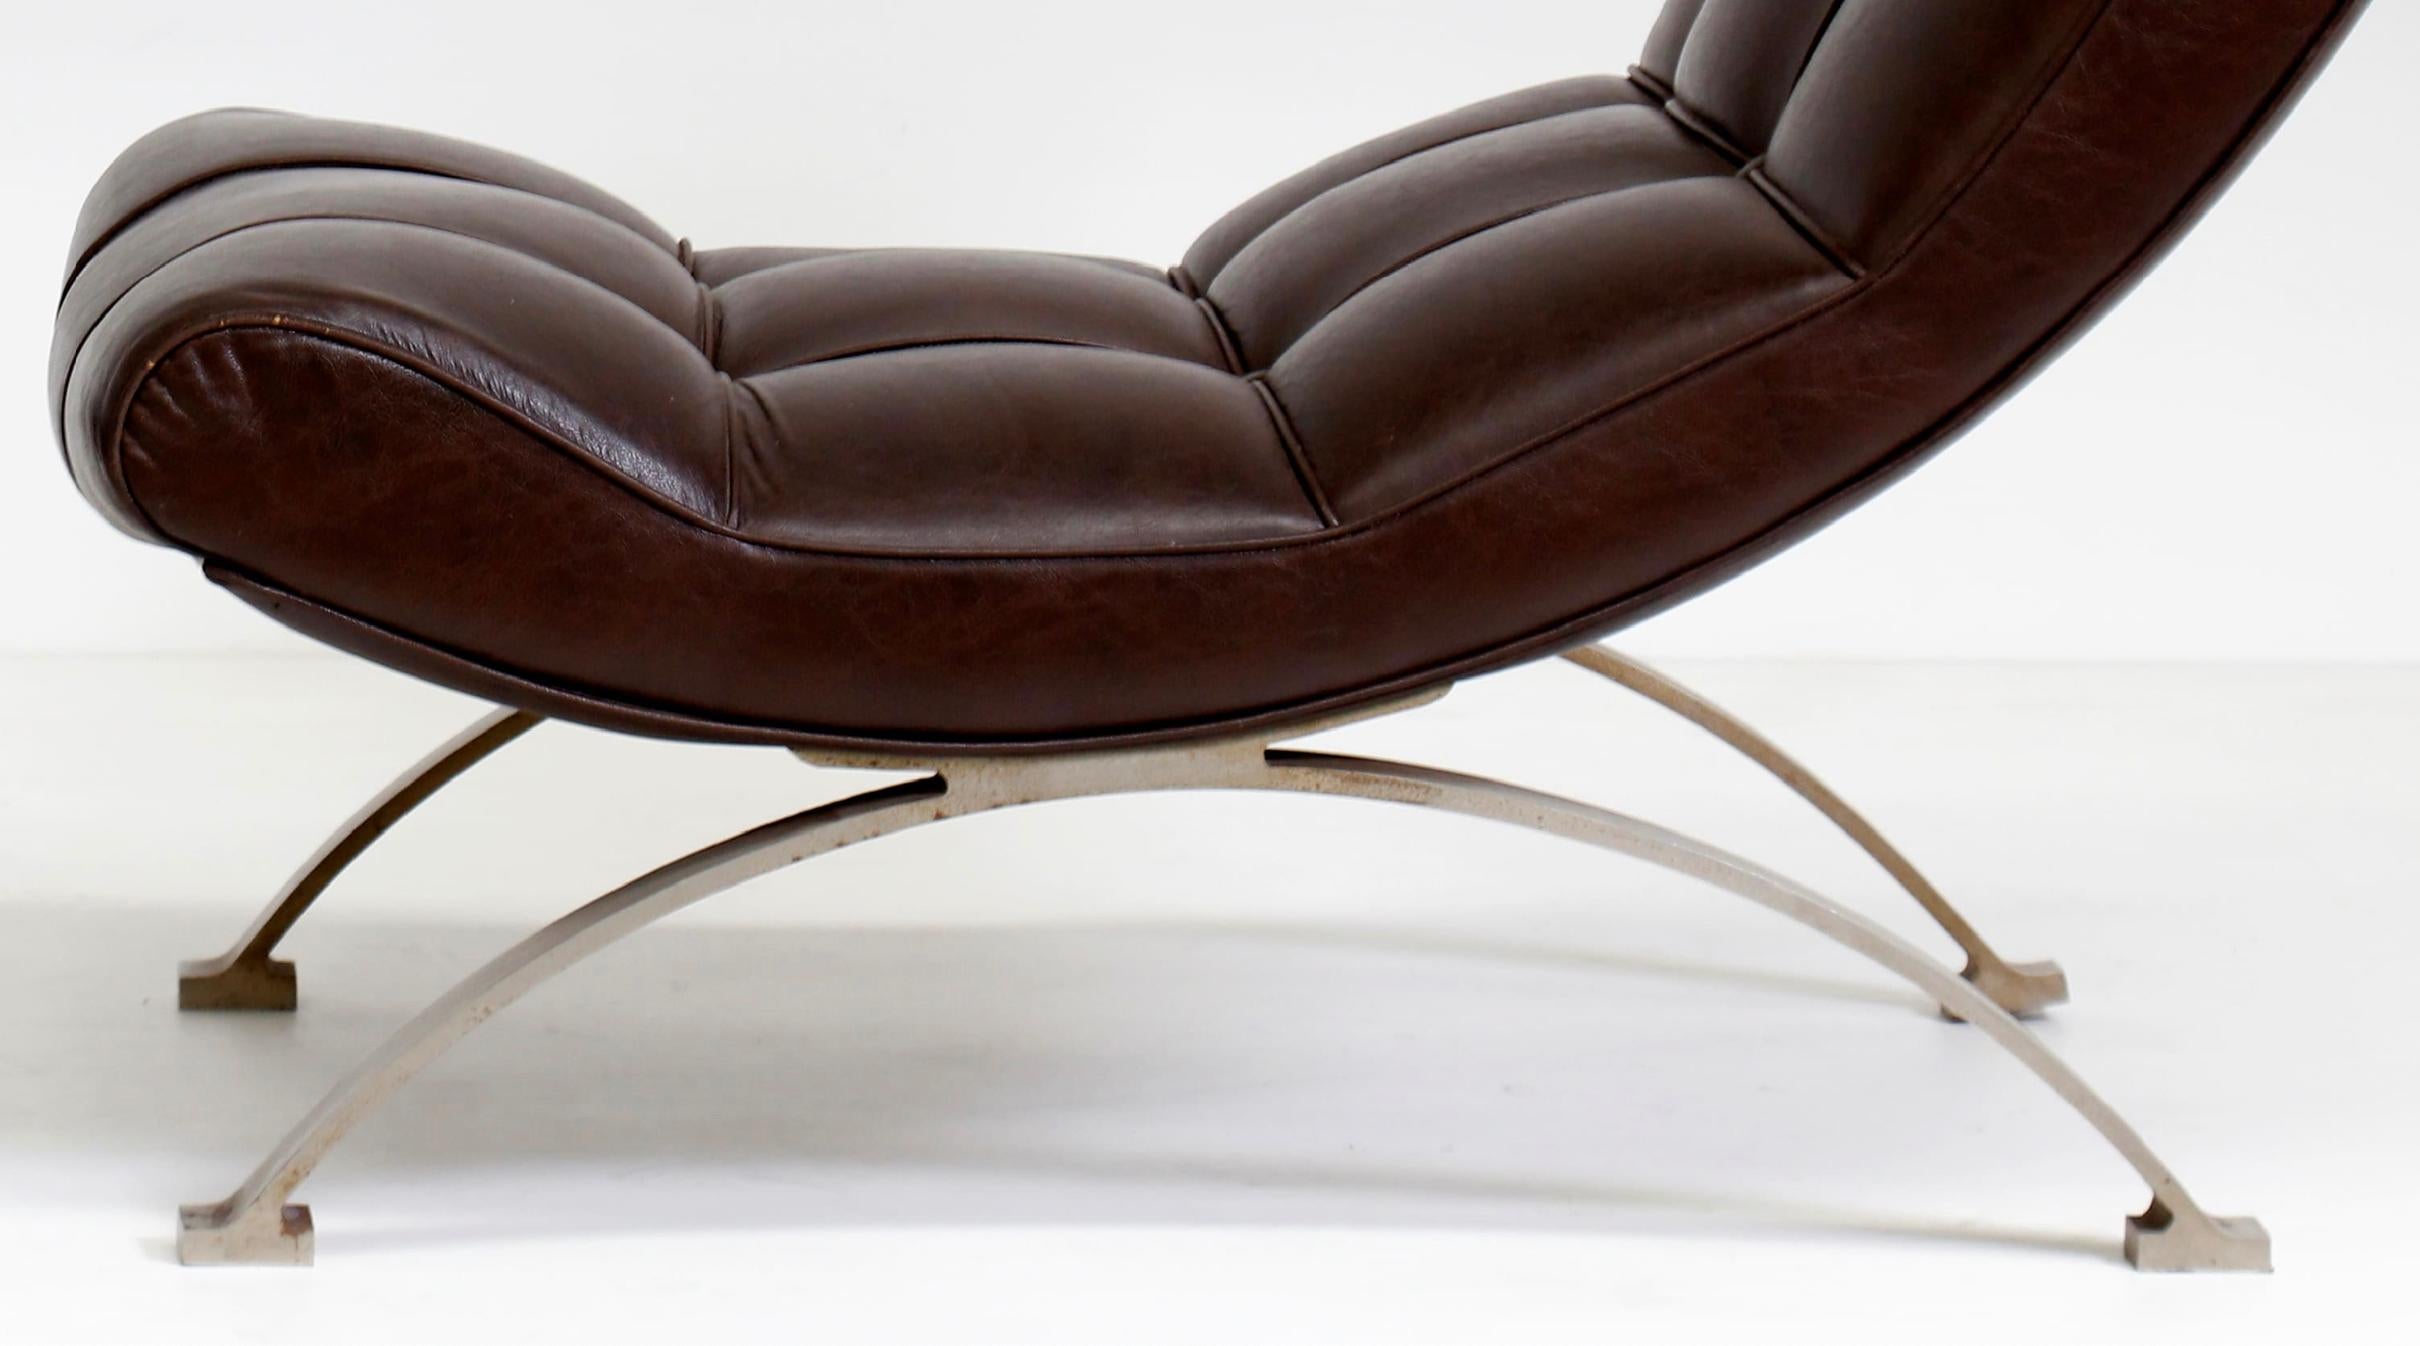 Late 20th Century Vintage Leather Armchair with Footrest, Italian Production, 1960s